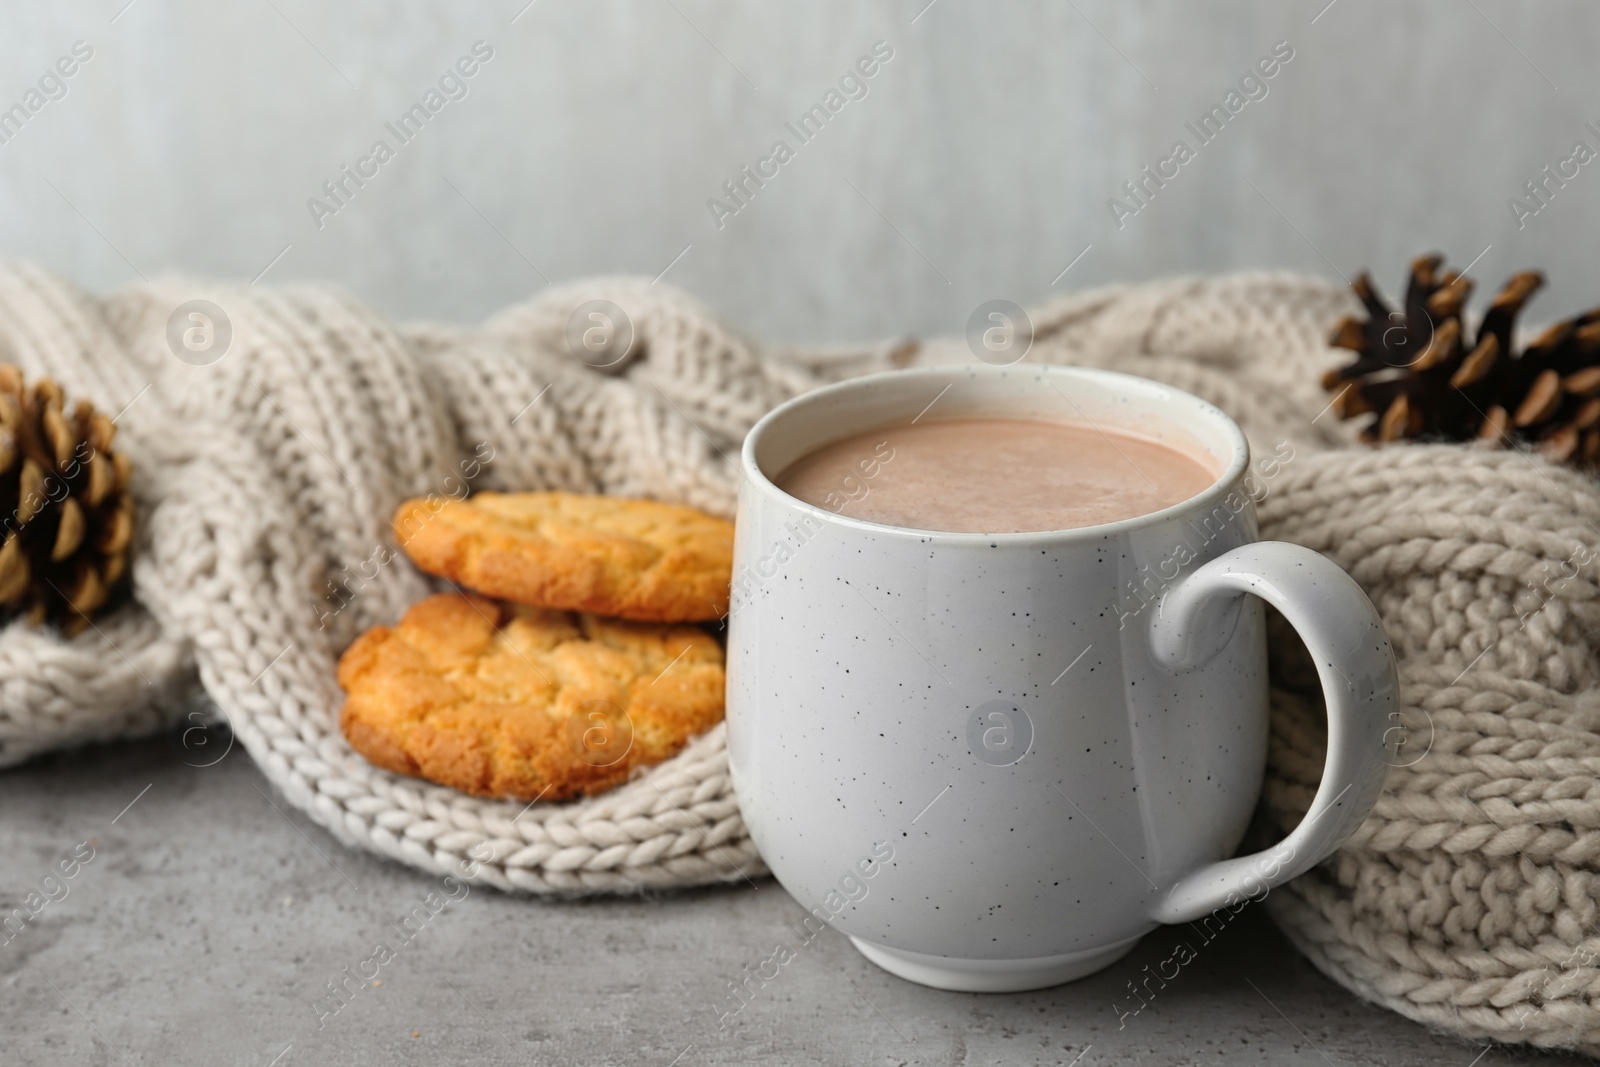 Photo of Delicious hot cocoa drink in cup, cookies and knitted blanket on grey surface